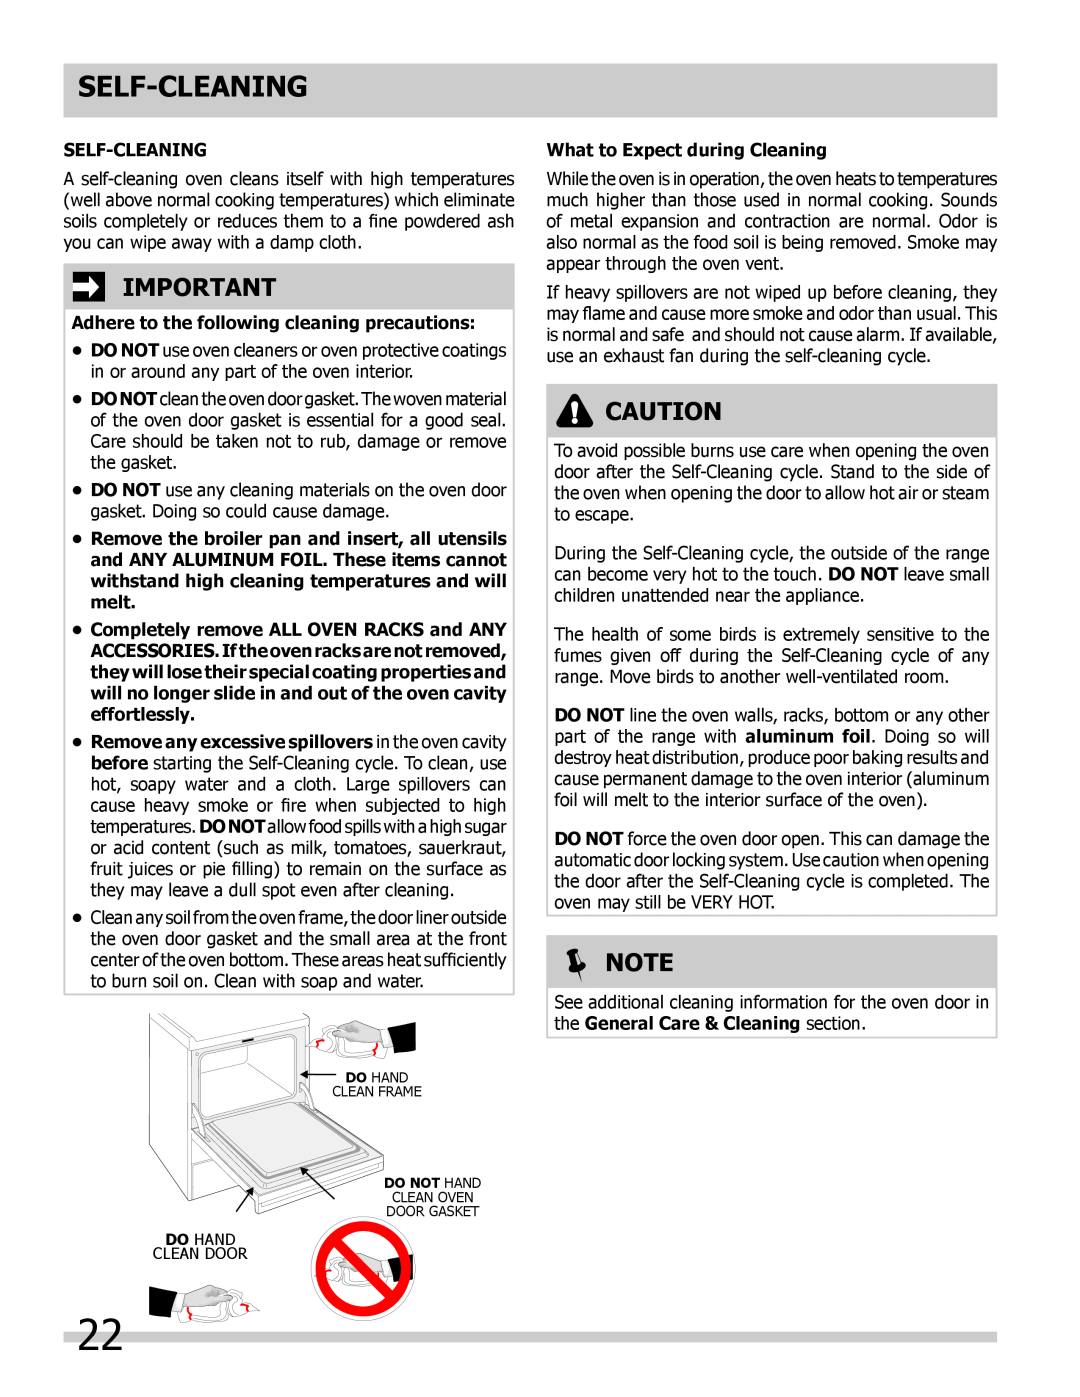 Frigidaire 318205307 Self-Cleaning, Adhere to the following cleaning precautions, What to Expect during Cleaning,  Note 